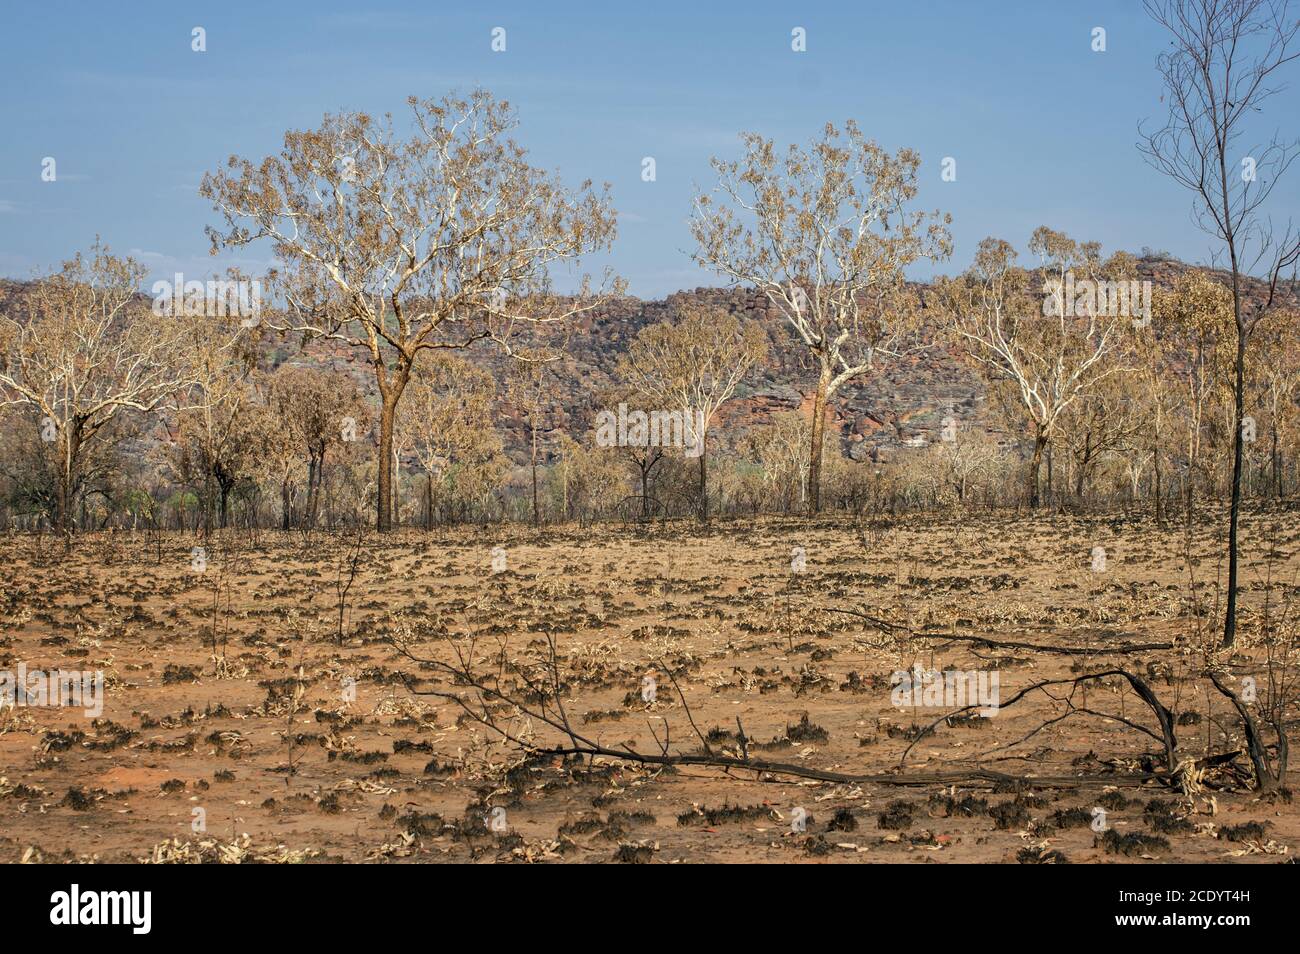 Savanna after Bushfire at the Outback – Western Australia Stock Photo